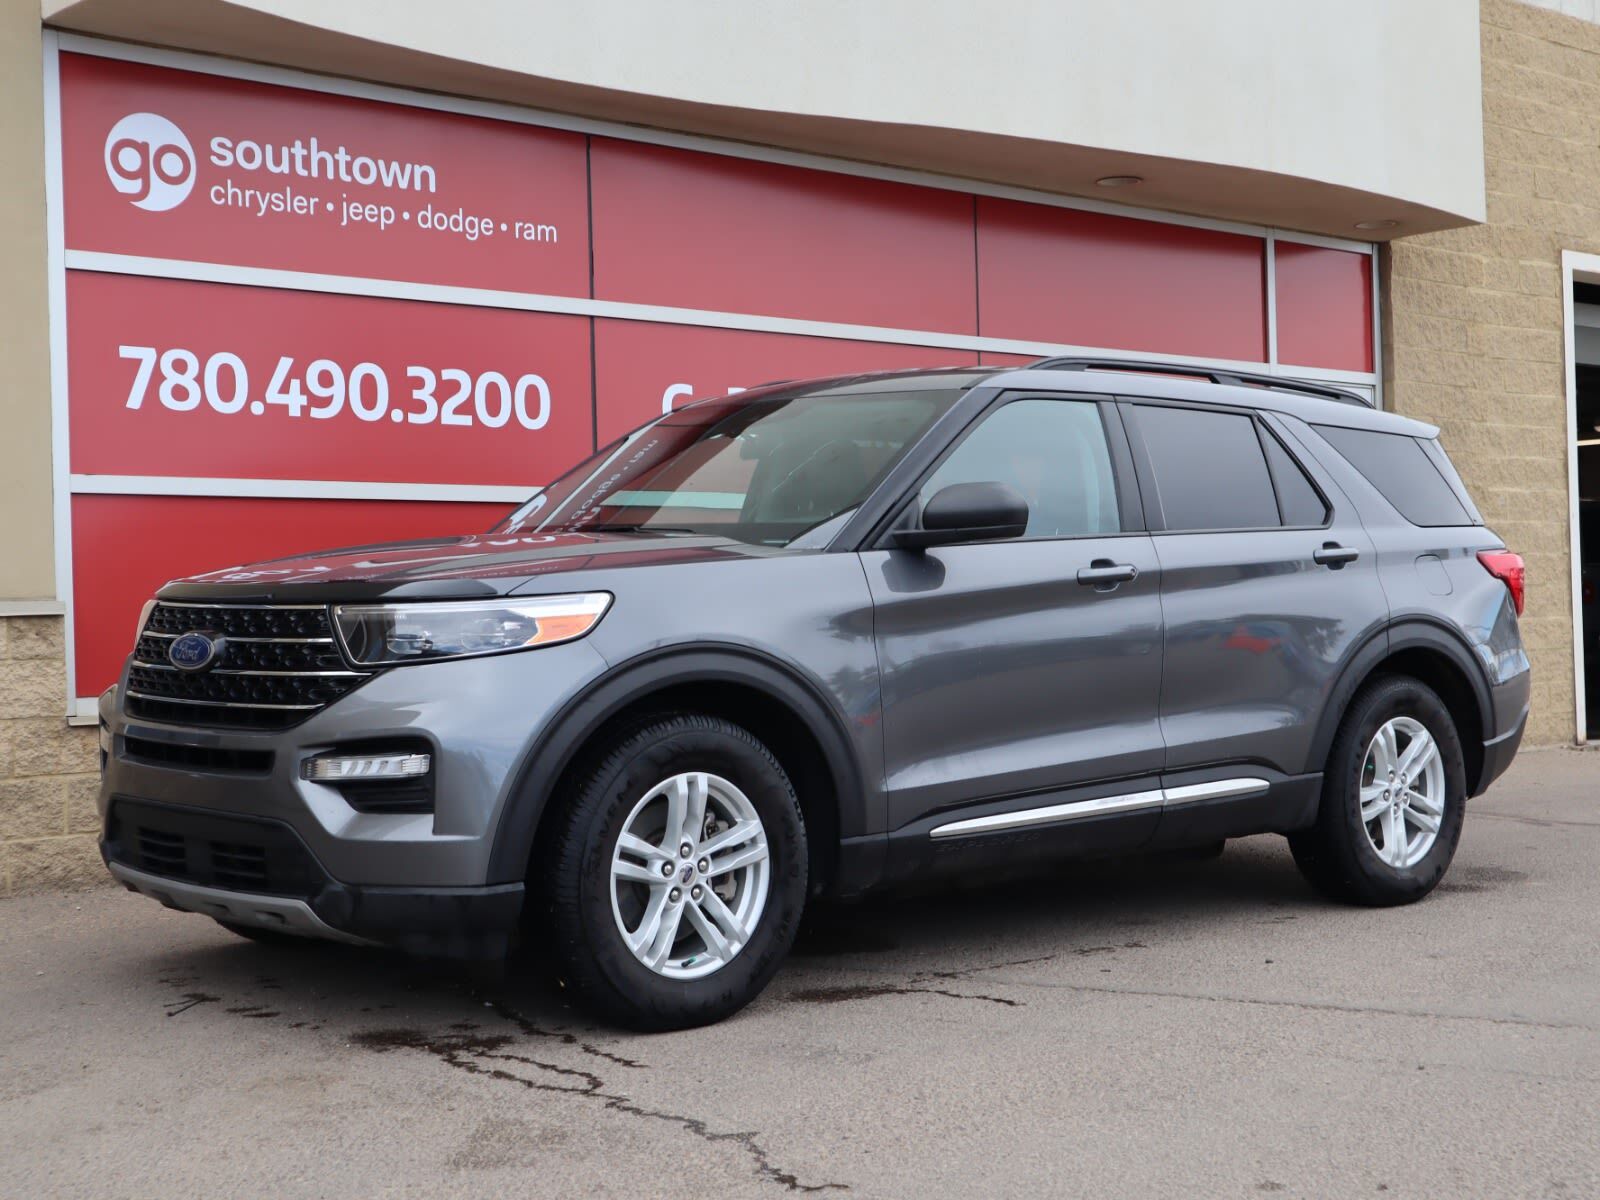 2021 Ford Explorer XLT IN GRAY METALLIC EQUIPPED WITH A 2.3L ECOBOOST